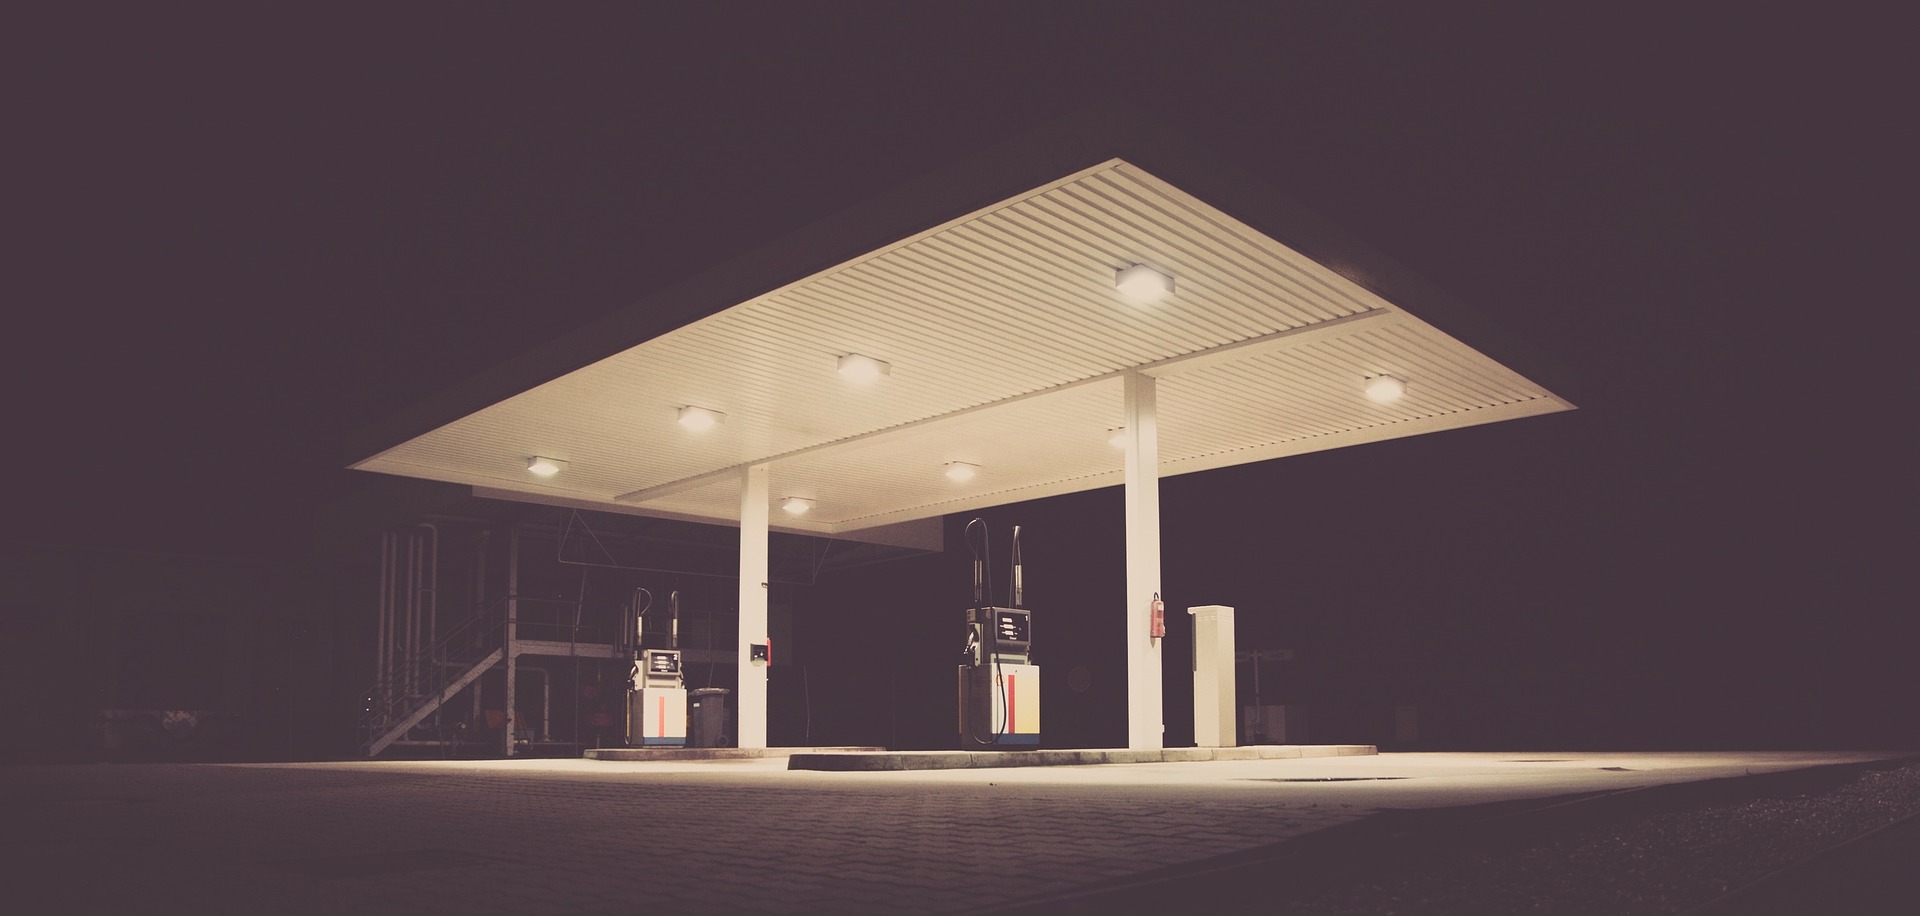 Fuel: Petrol stations could close due to Covid-19.